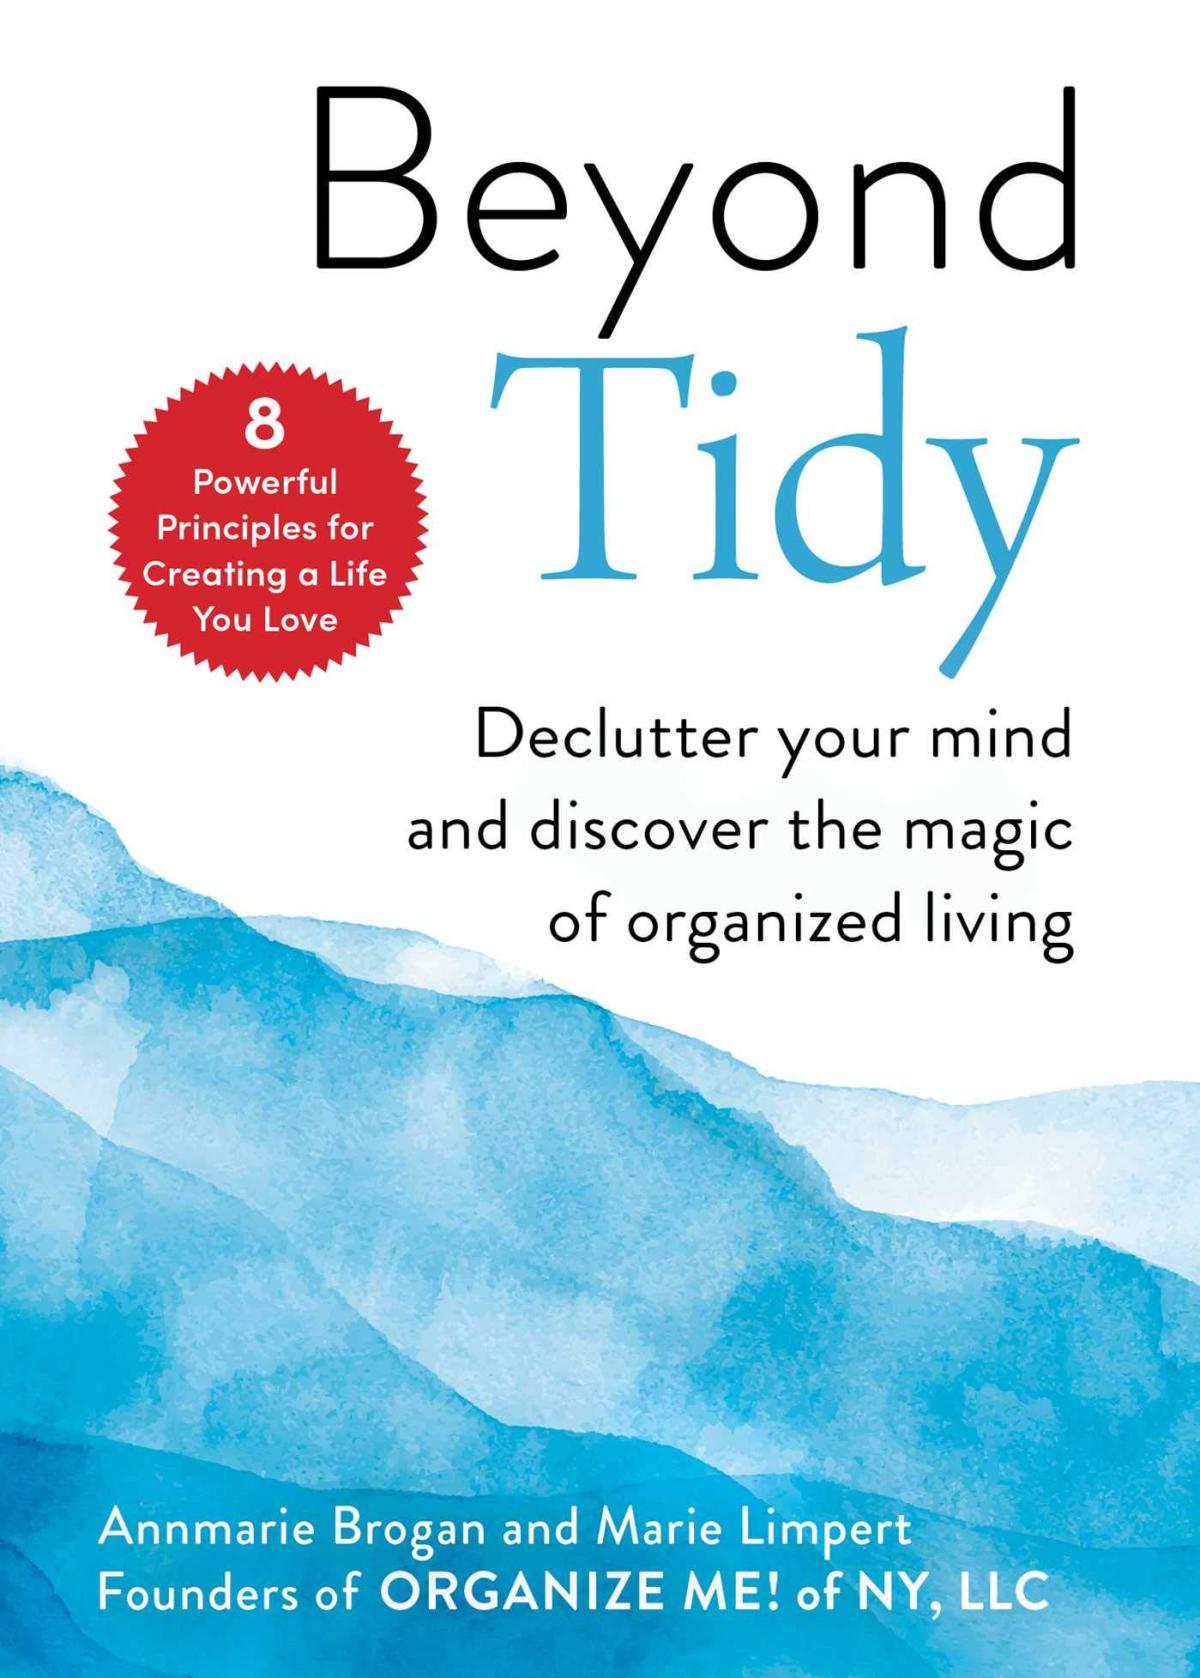 The cover of the book Beyond Tidy by Annmarie Brogan and Marie Limpert.